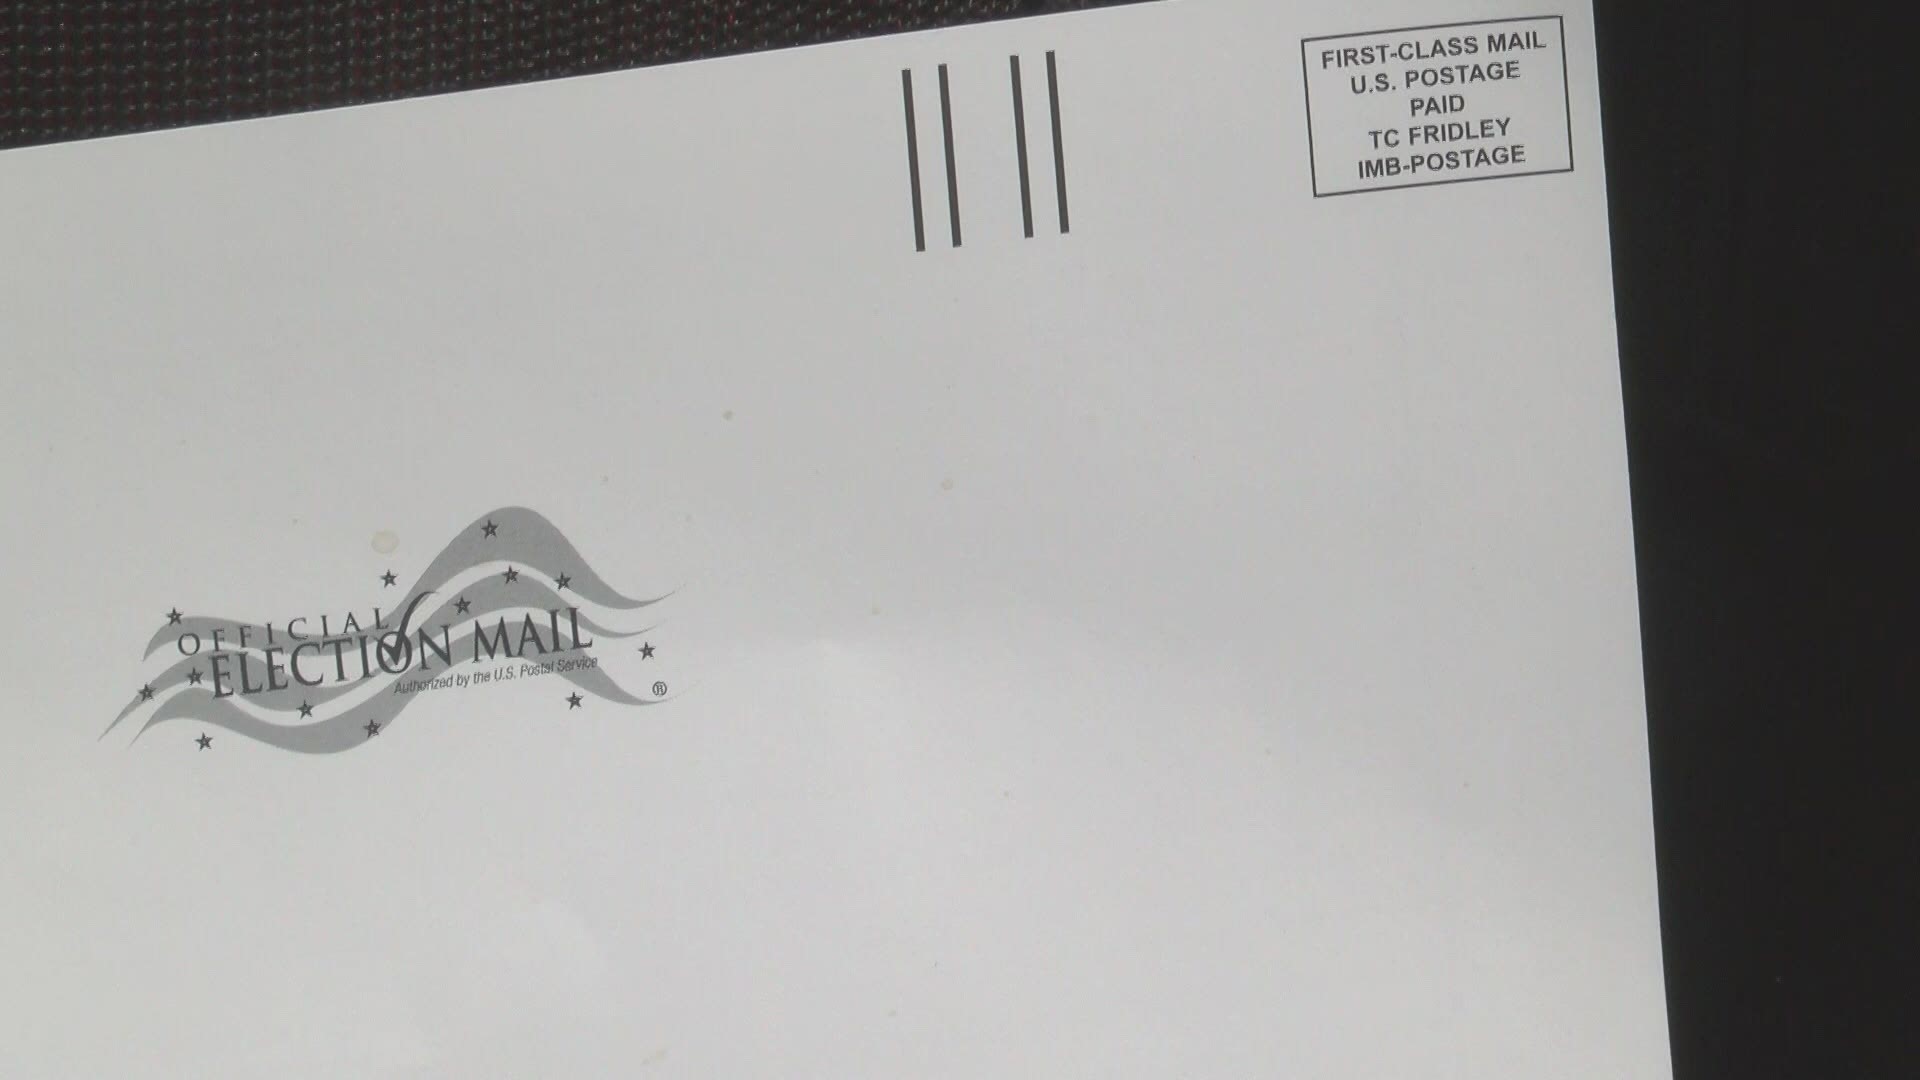 Election officials confirm voters will not receive more than one ballot if they send in more than one application.